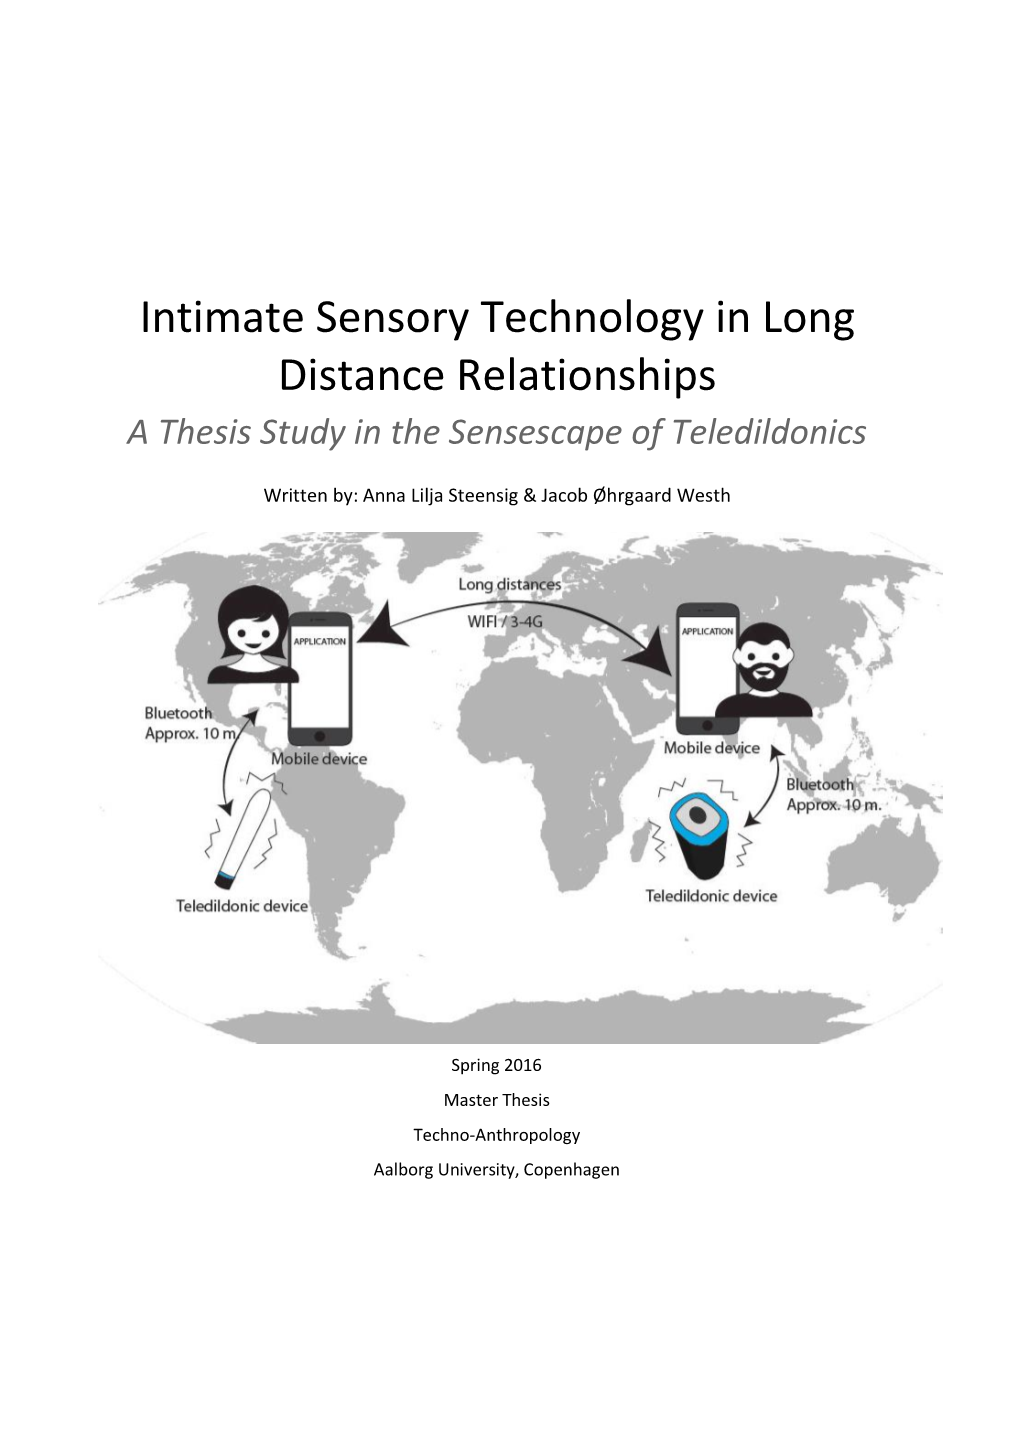 Intimate Sensory Technology in Long Distance Relationships